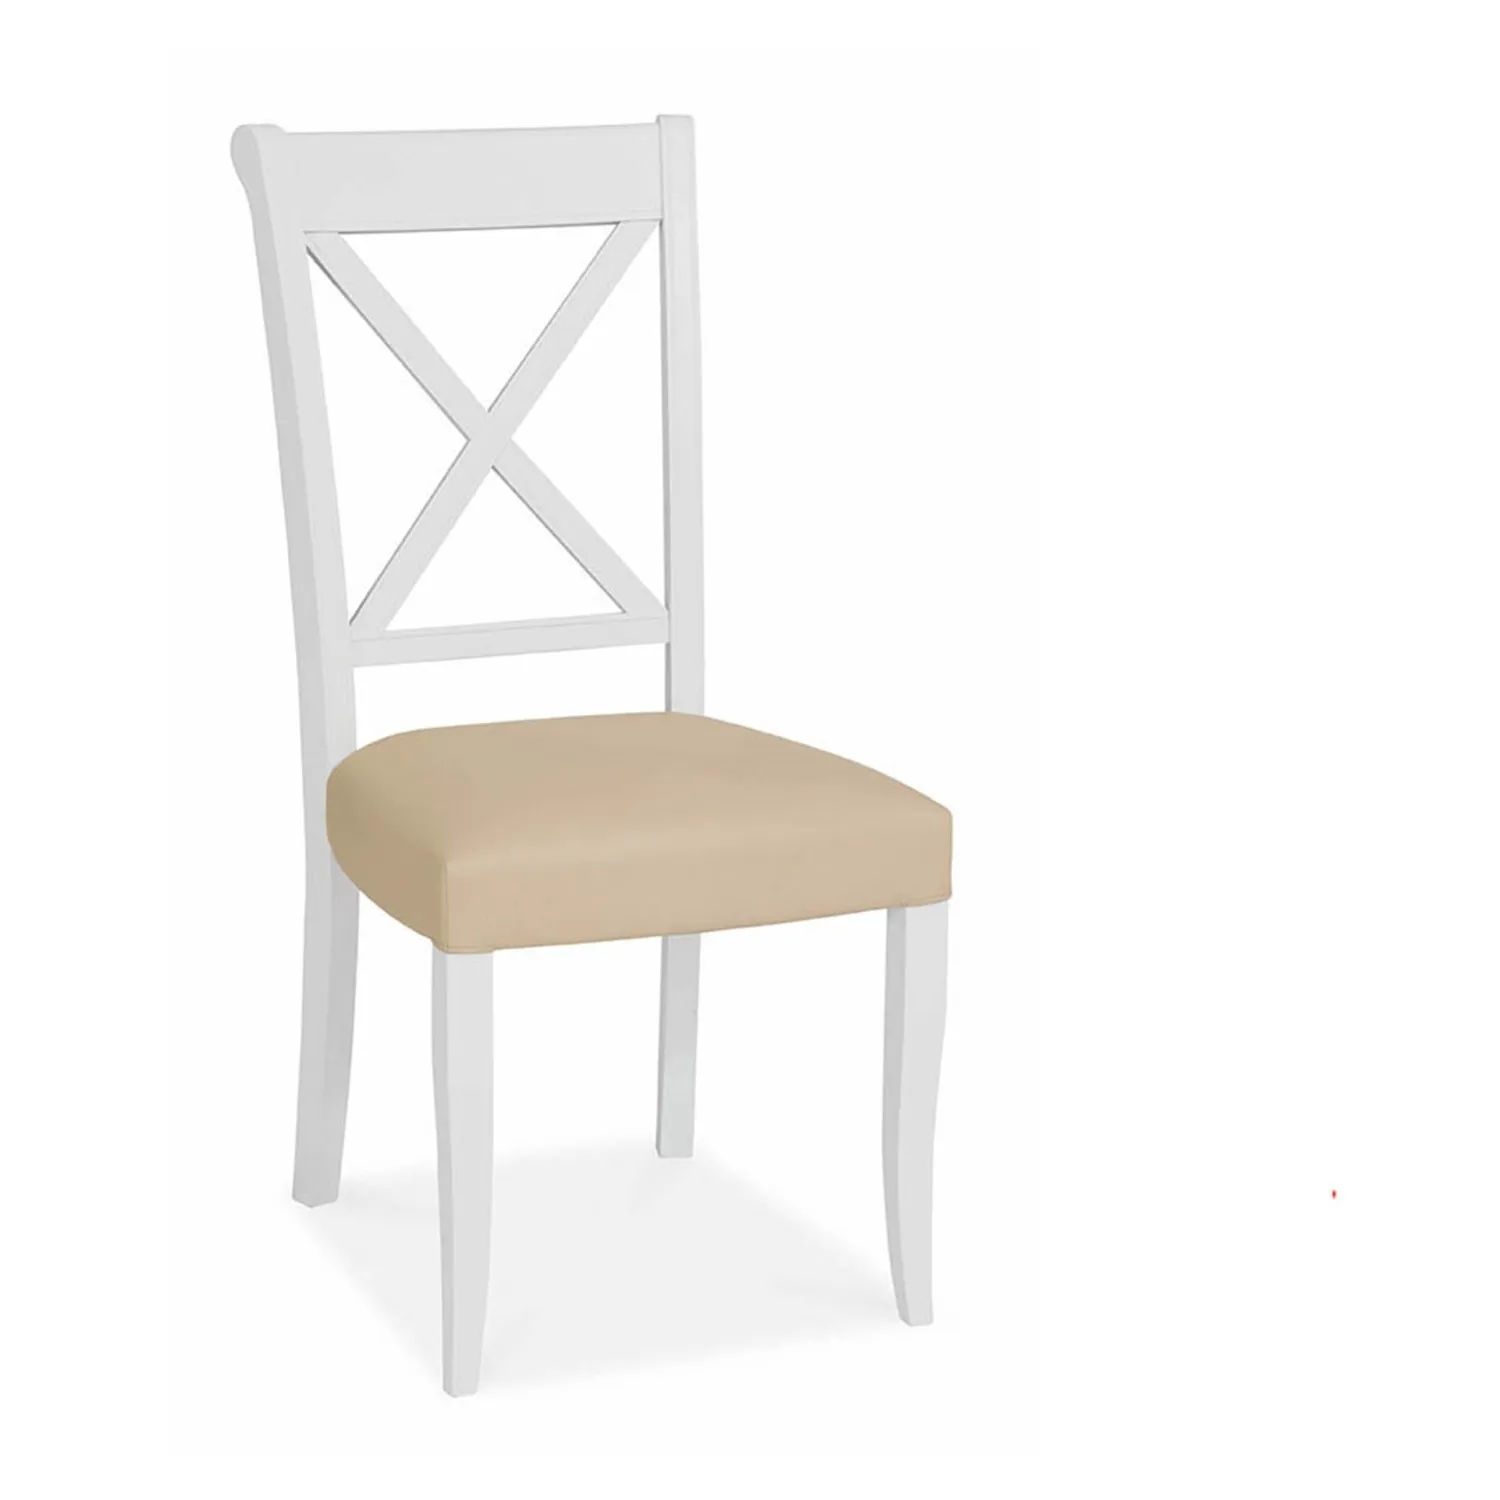 Pair of 2 Tone Cross Back Dining Chairs Ivory Leather Seats